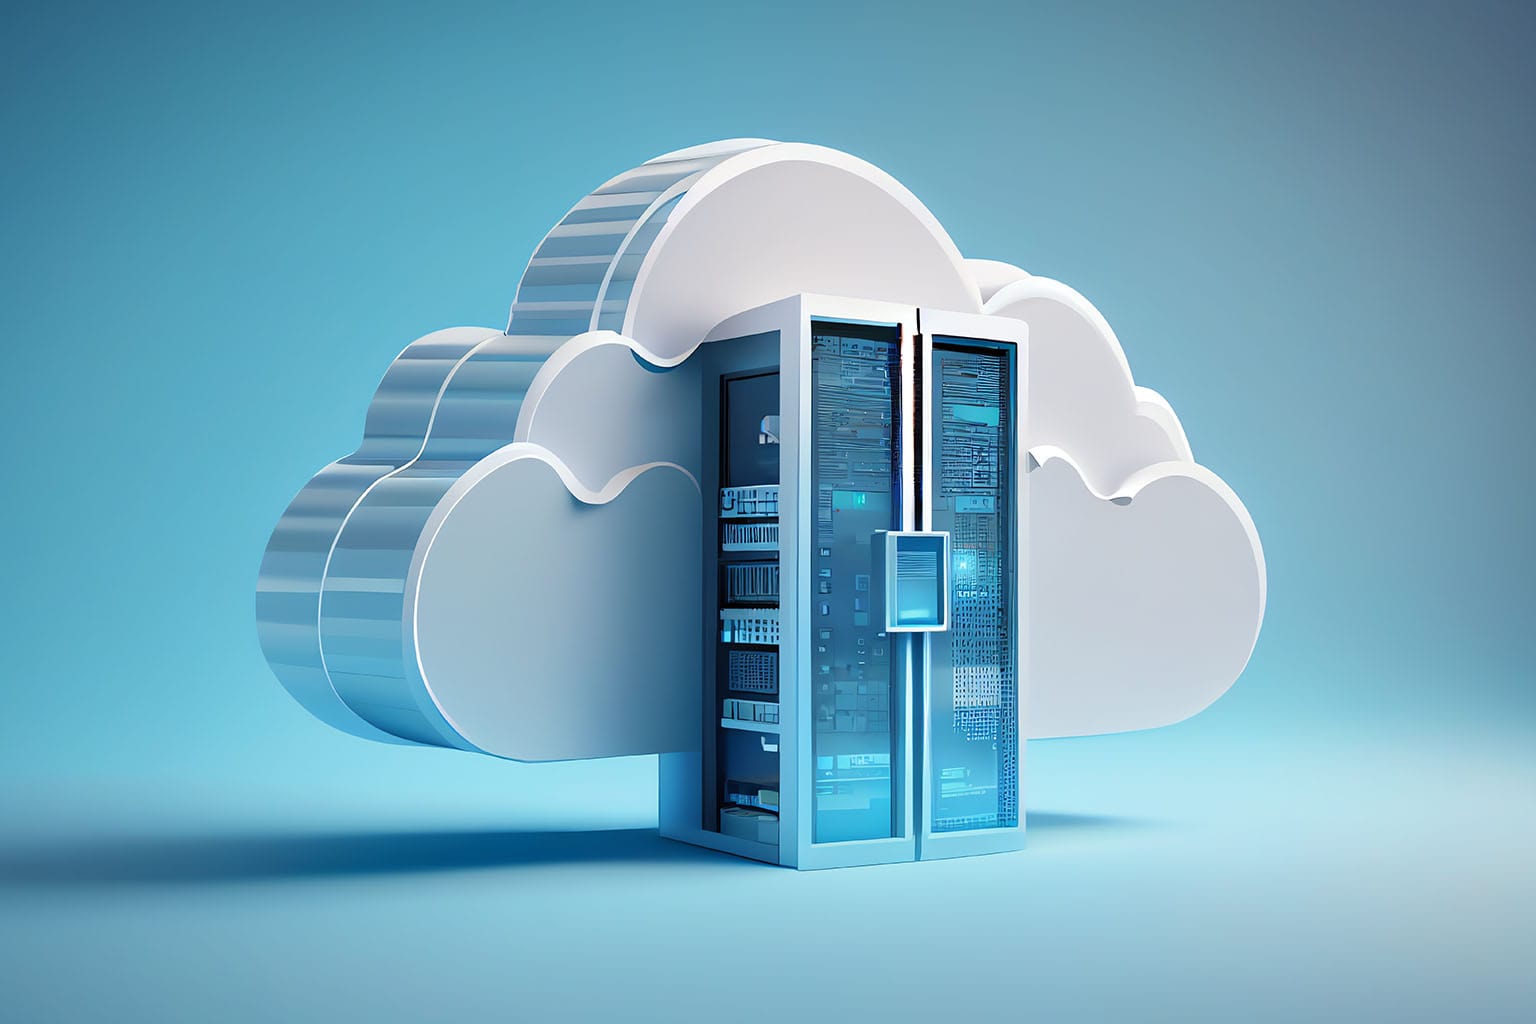 A cloud with a vault symbolizing NetSuite accounting software